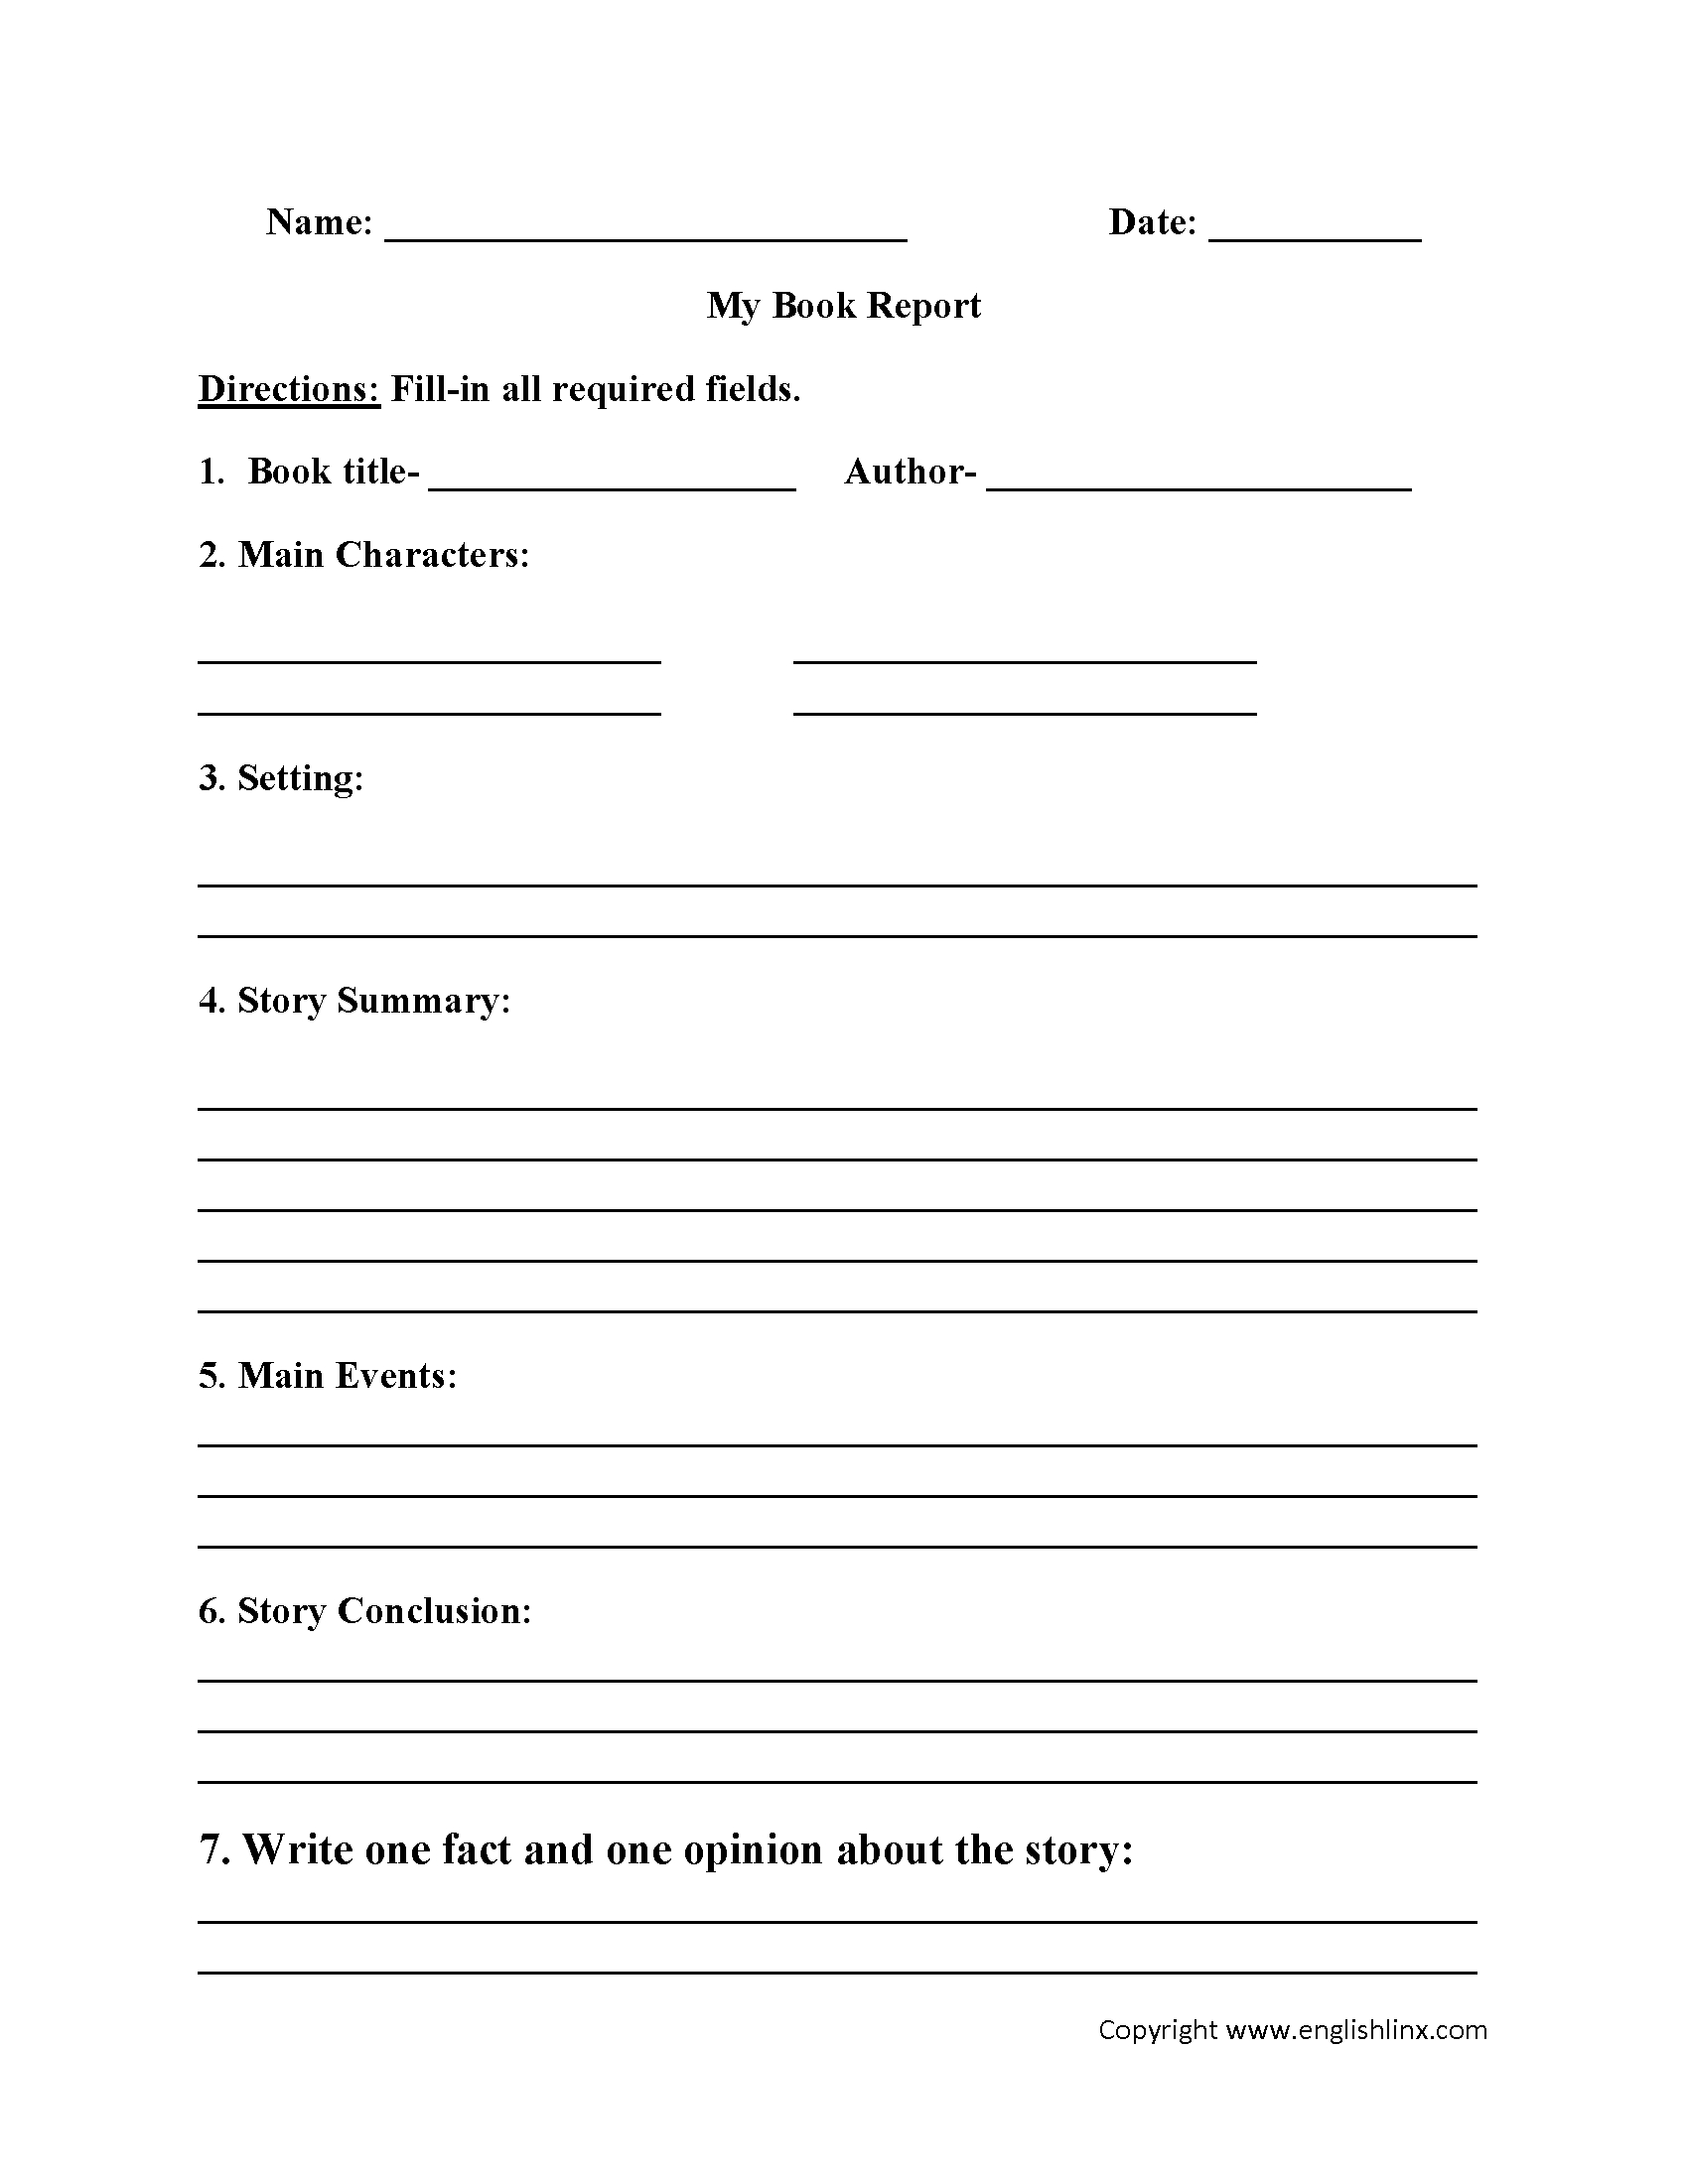 Englishlinx  Book Report Worksheets intended for Book Report Template 5Th Grade